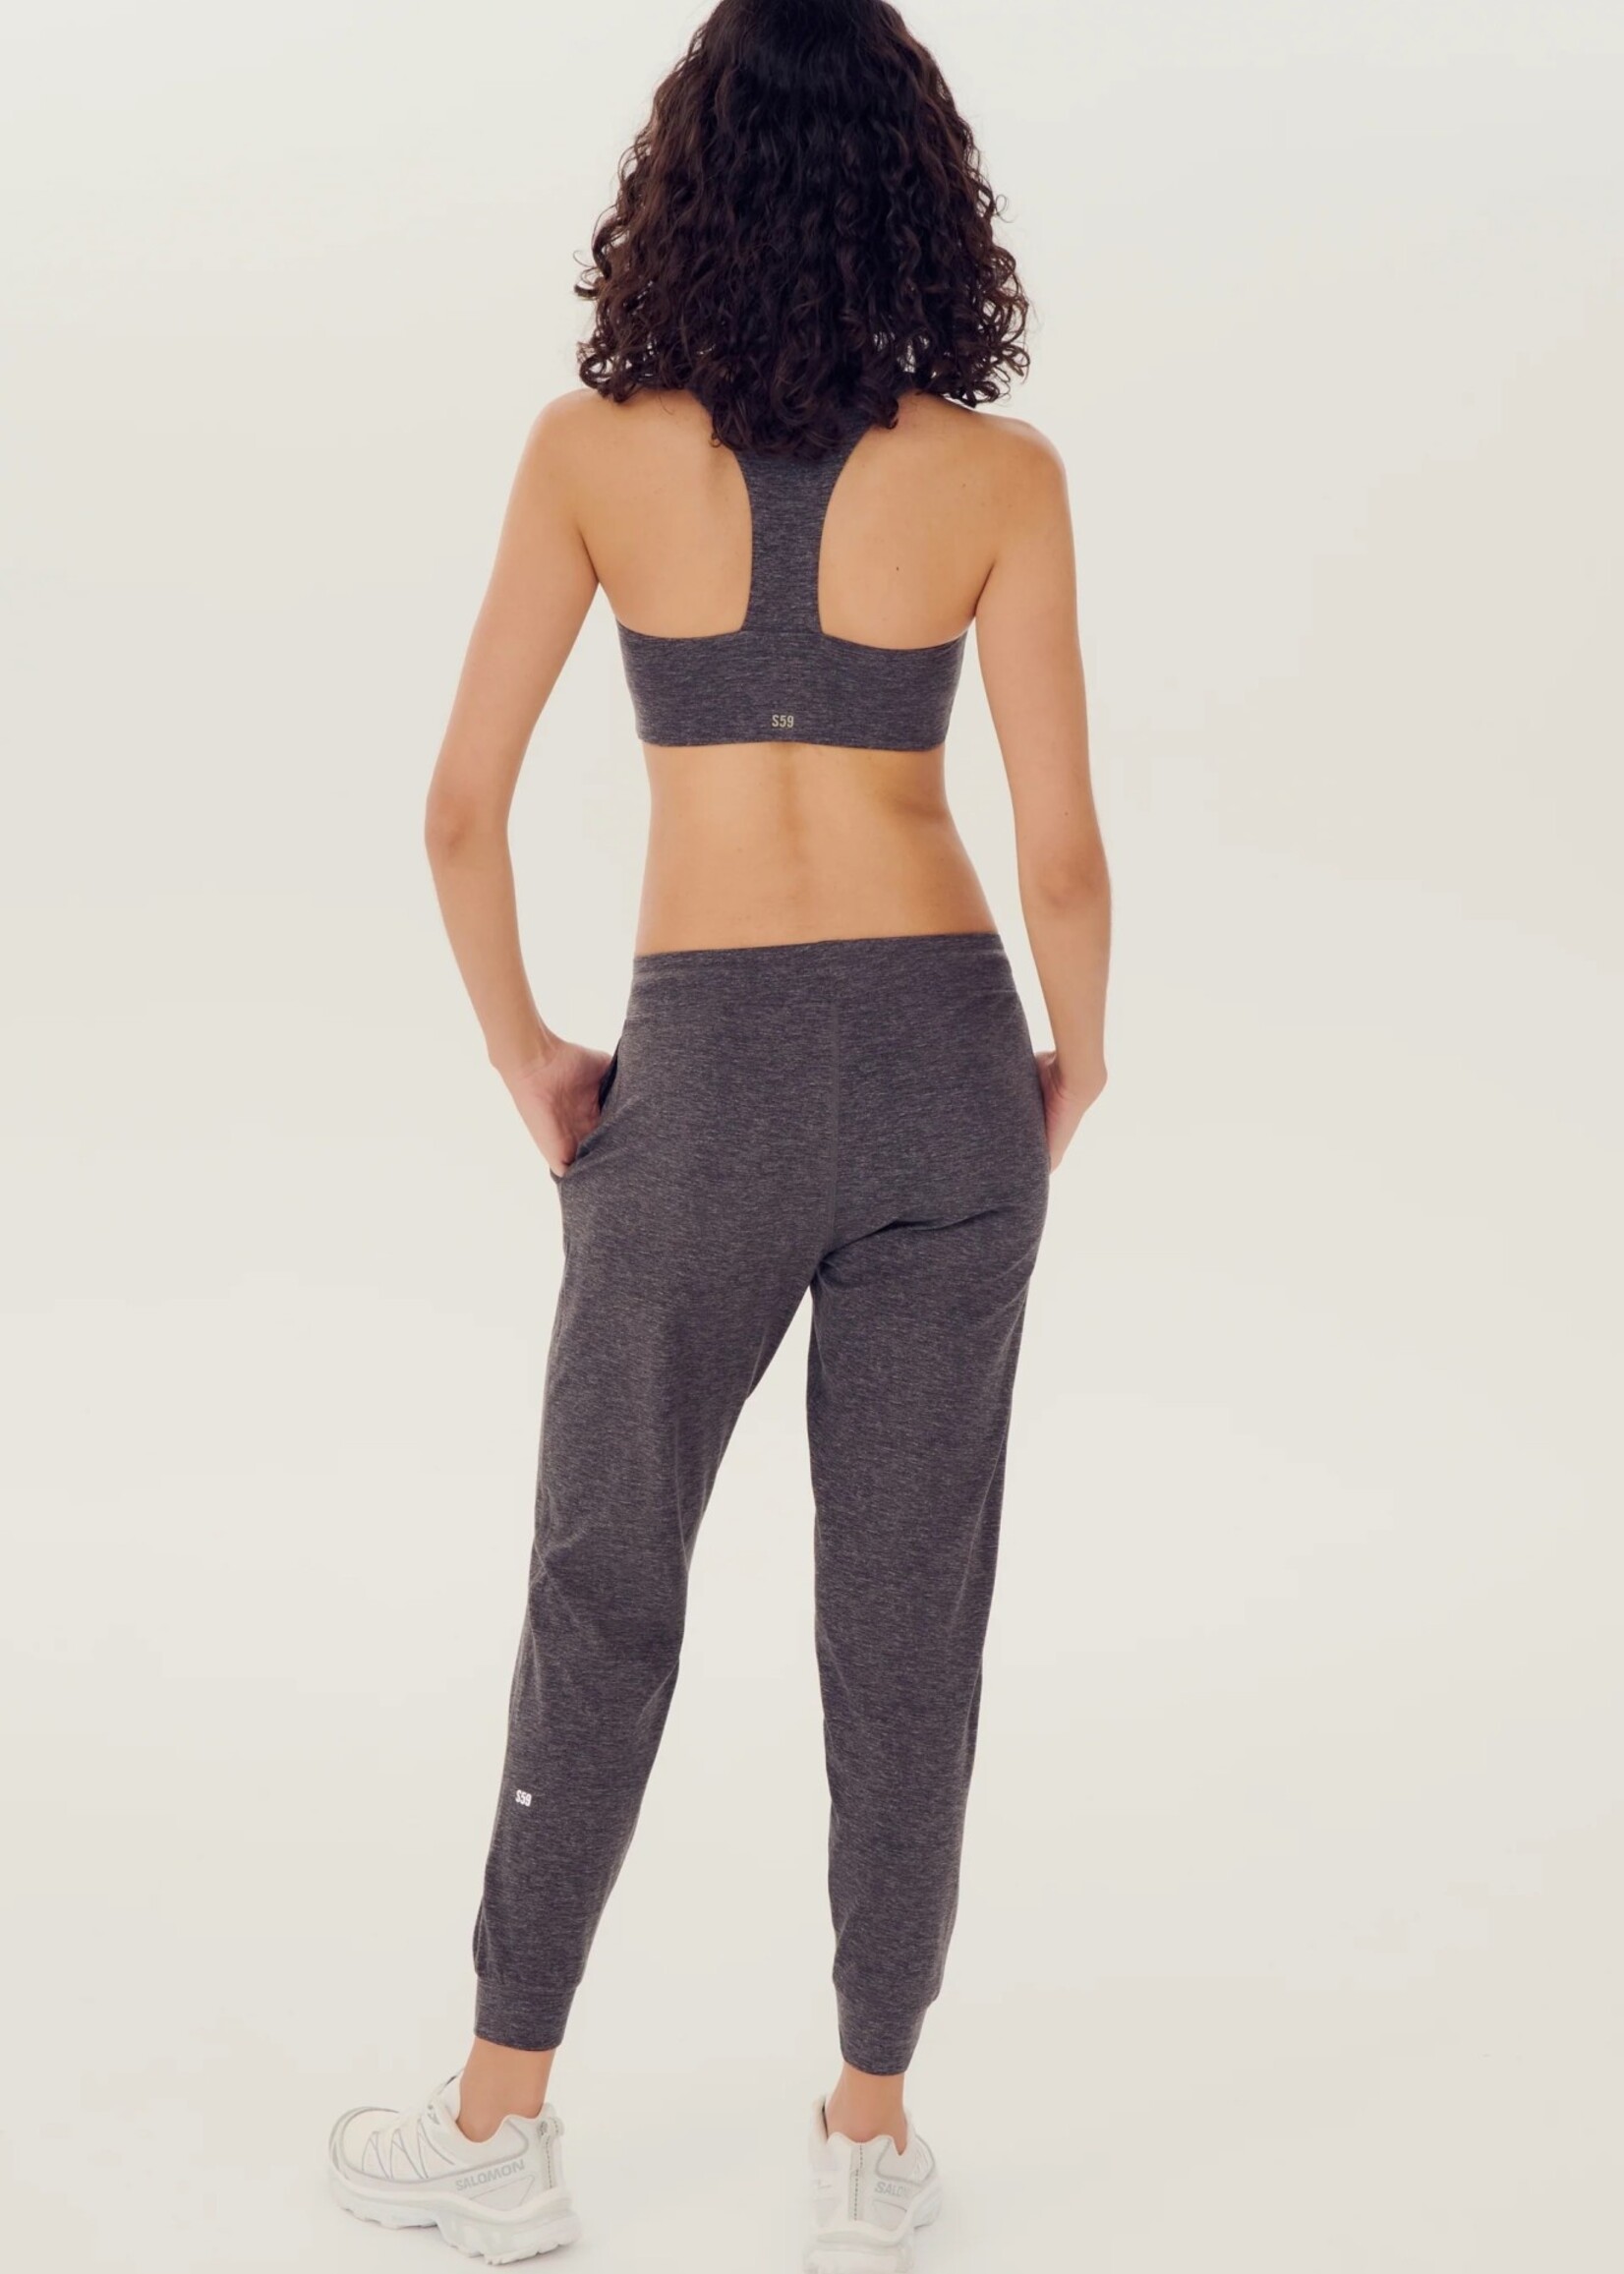 Splits59 Classic Airweight Jogger Heather Grey